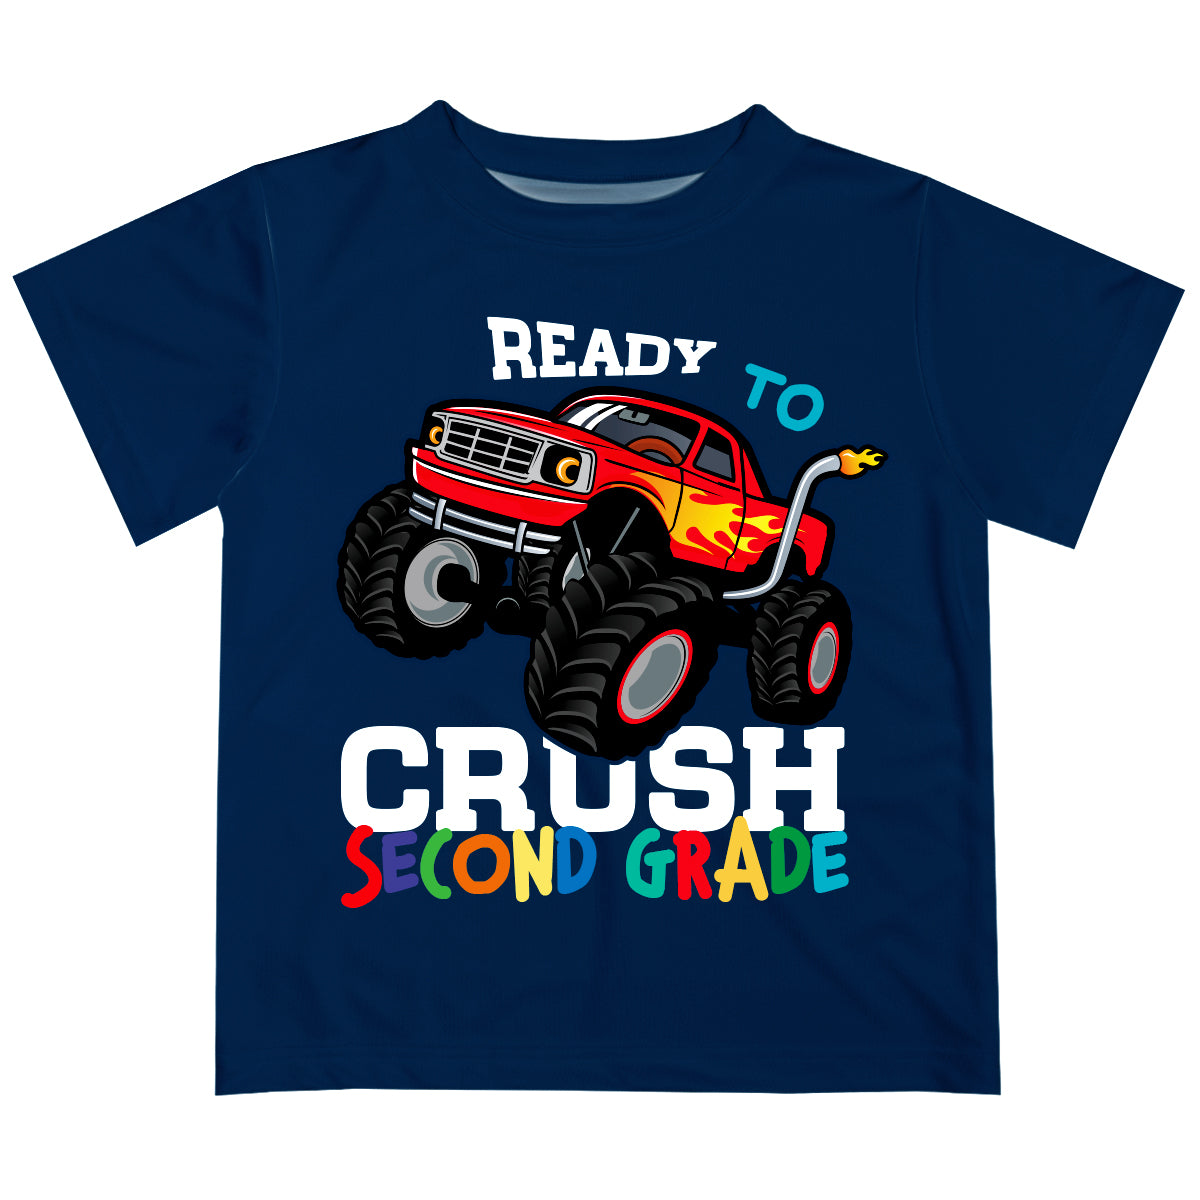 Ready To Crush Personalized Your Grade Navy Short Sleeve Tee Shirt